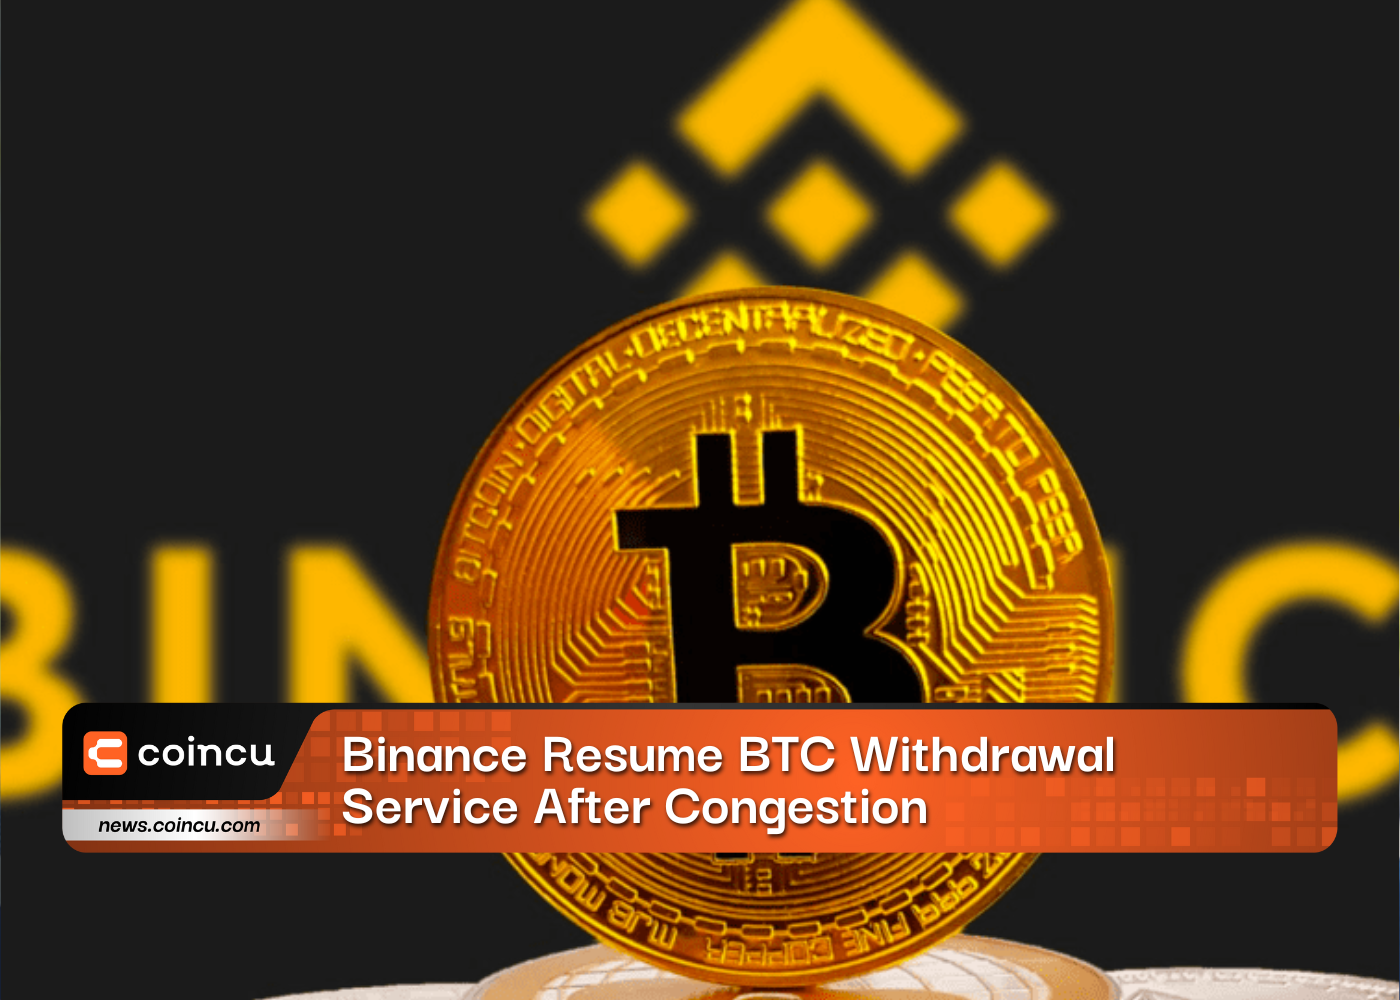 Binance Resume BTC Withdrawal Service After Congestion